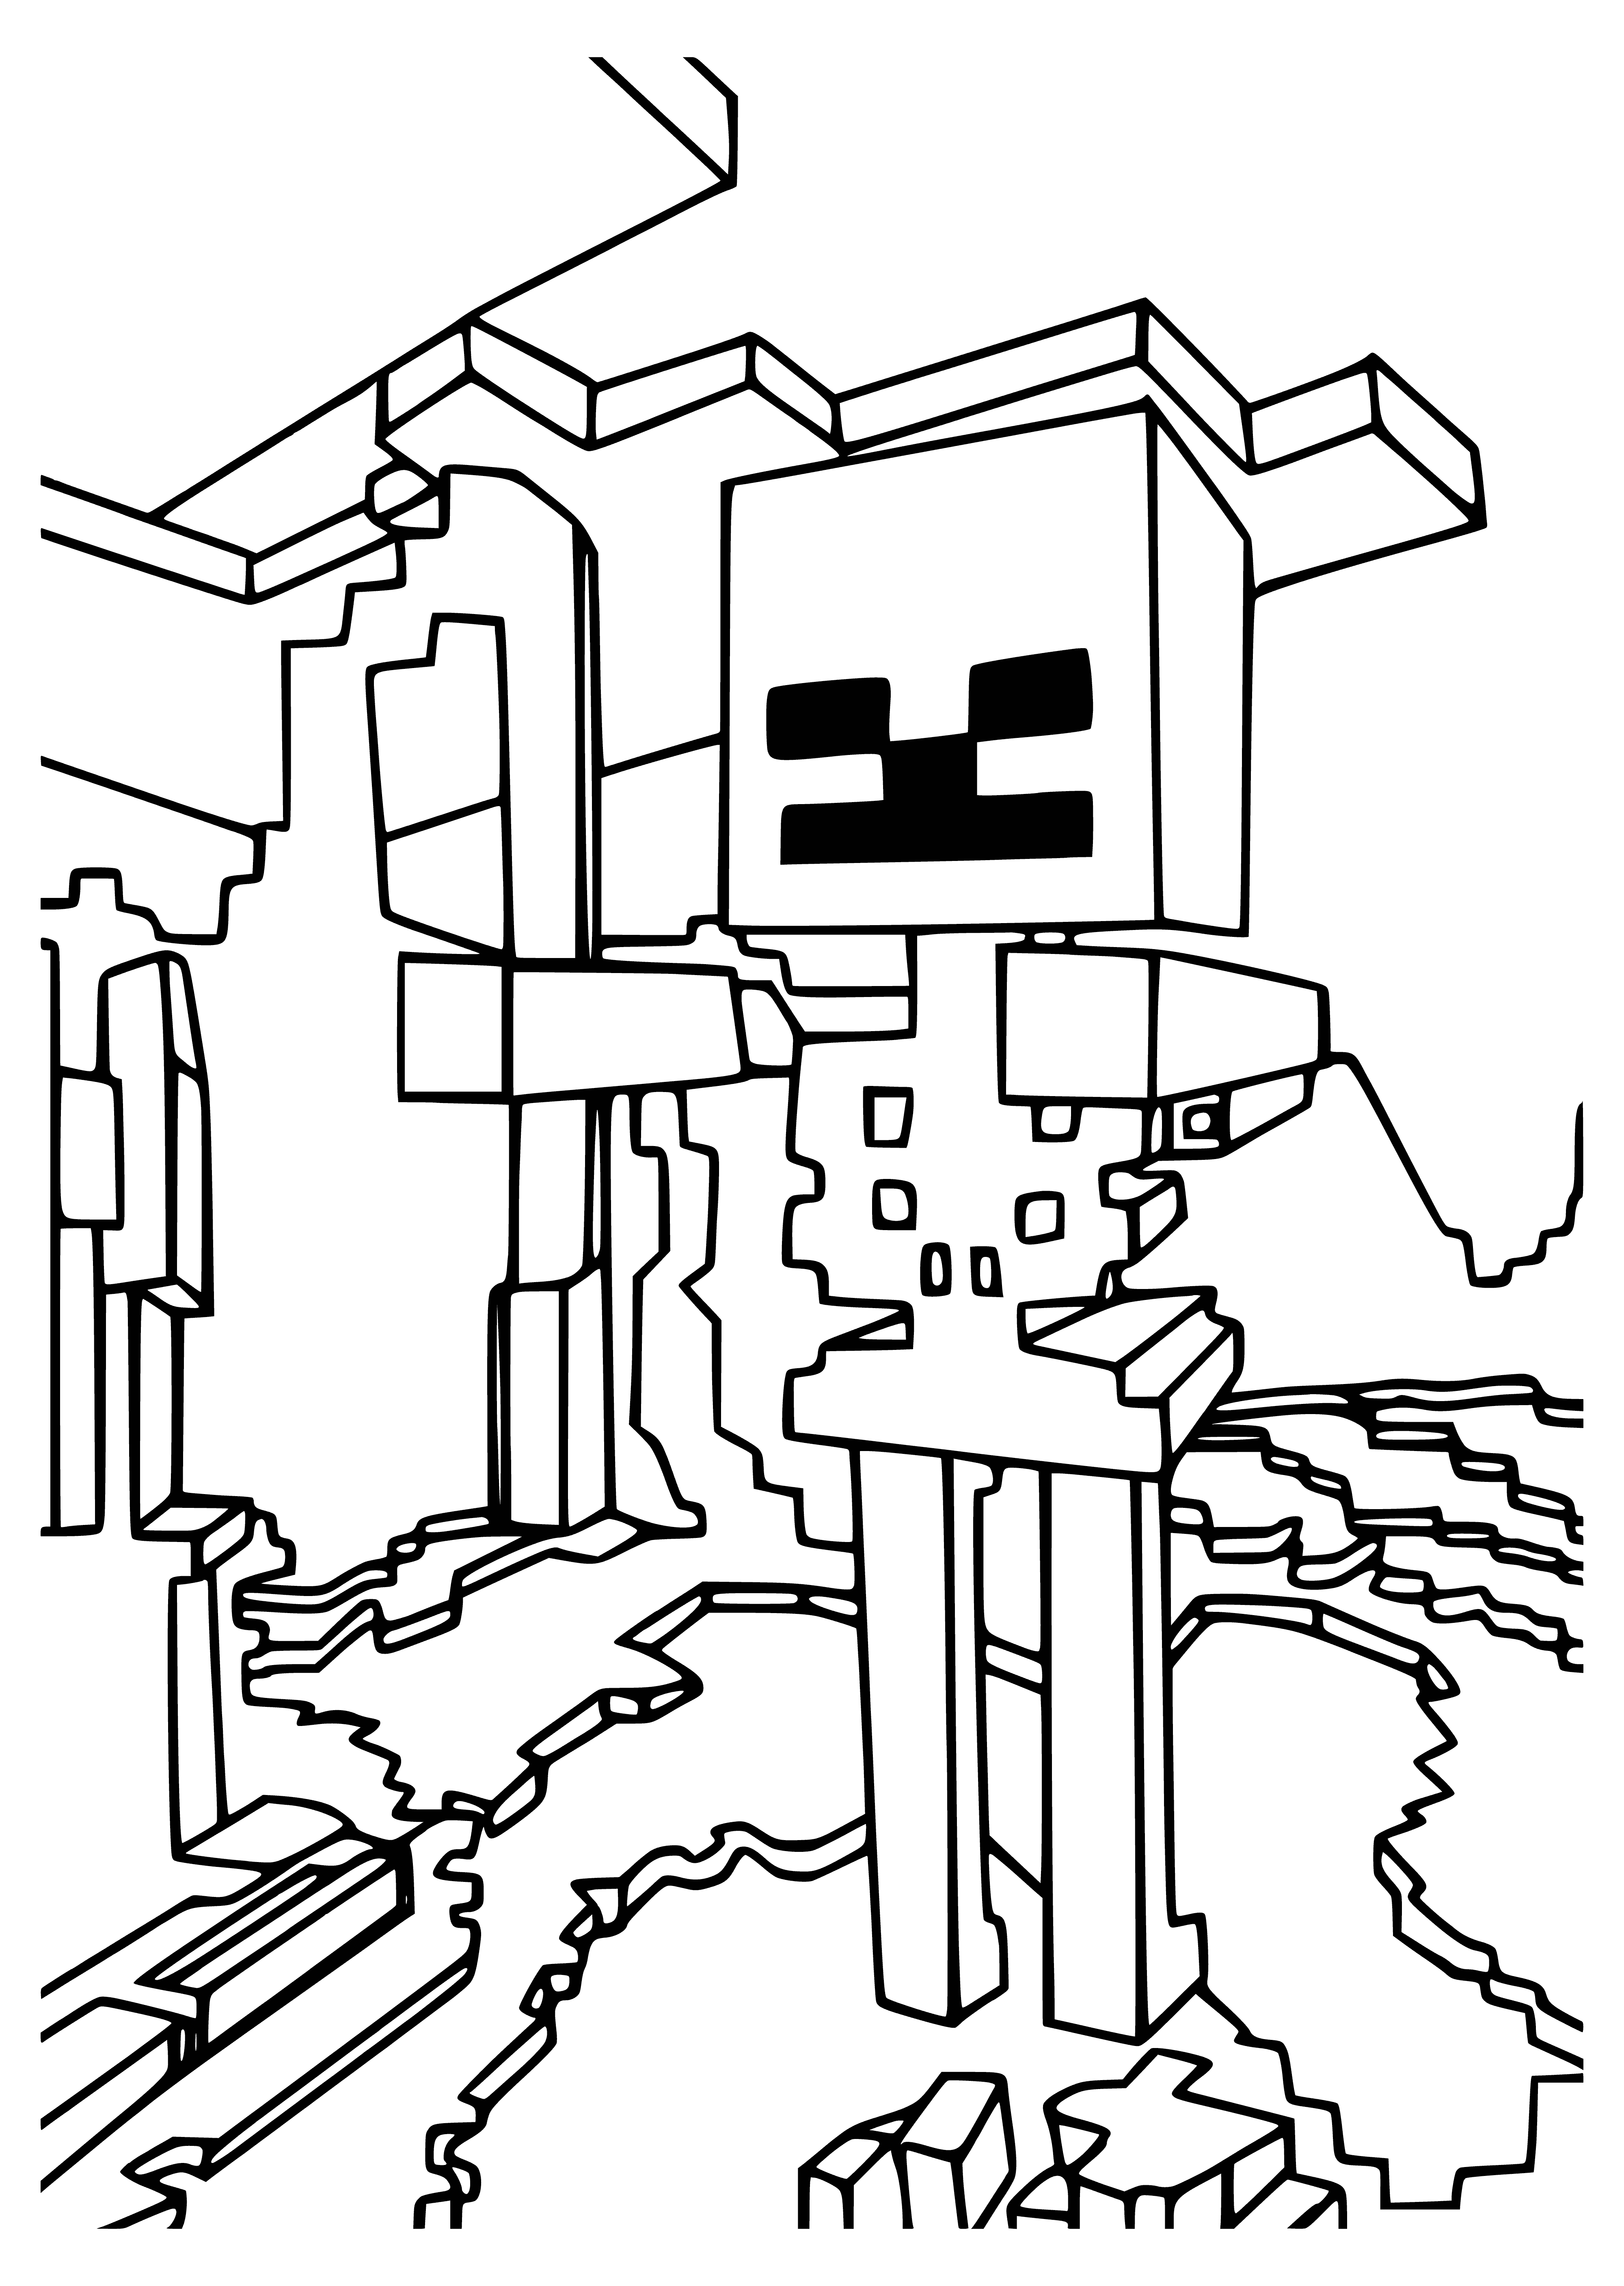 coloring page: Skeleton in Minecraft has glowing red eyes, wearing clothes and holding bow and arrow, standing on two legs with arms outstretched.